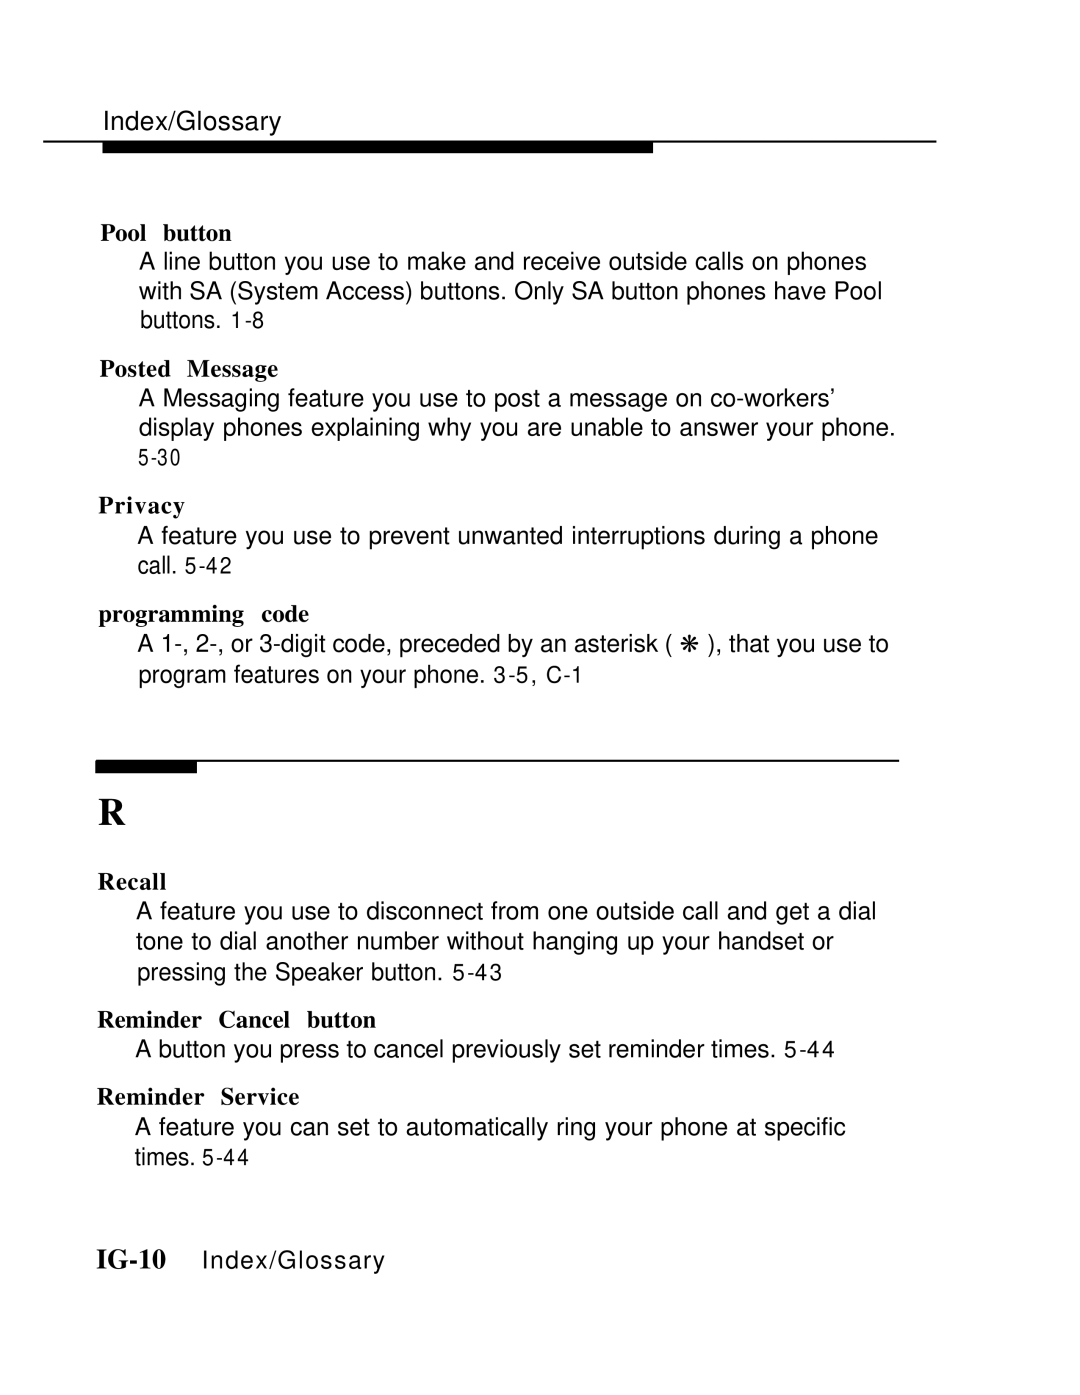 AT&T MLX-10 manual Pool button, Posted Message, Privacy, Programming code, Recall, Reminder Cancel button, Reminder Service 